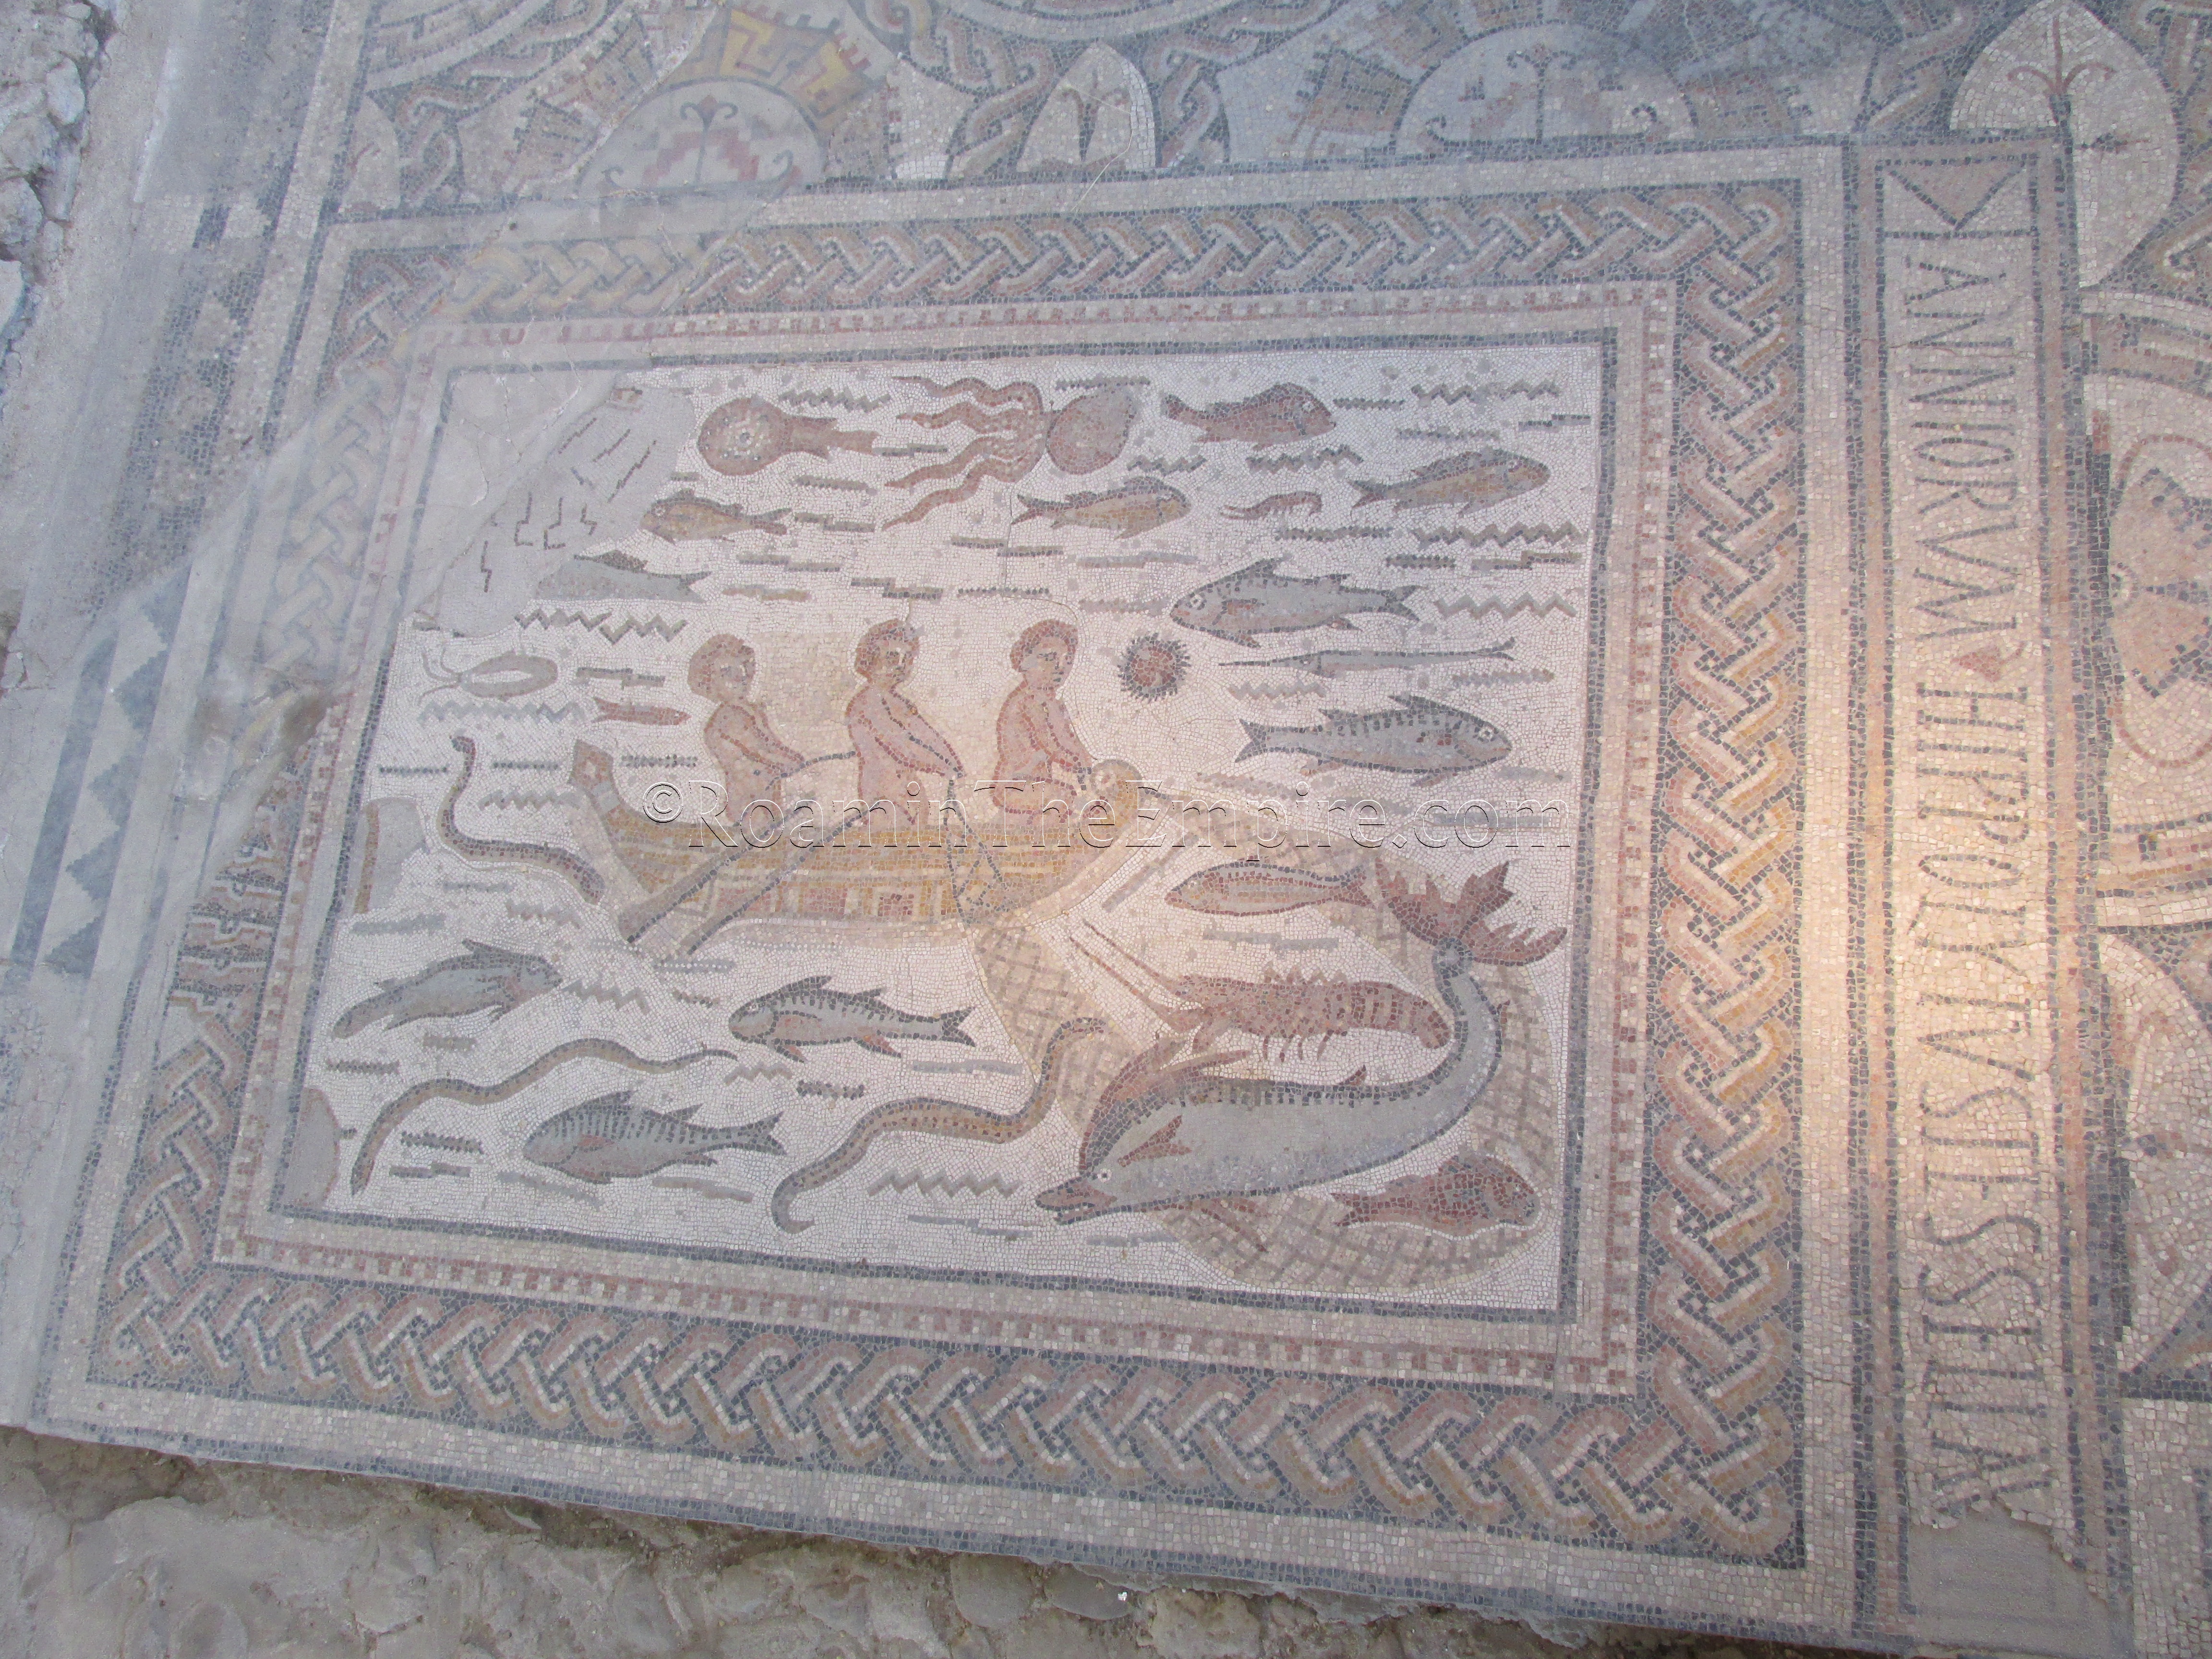 Hippolytus mosaic with inscription on the right. Complutum.